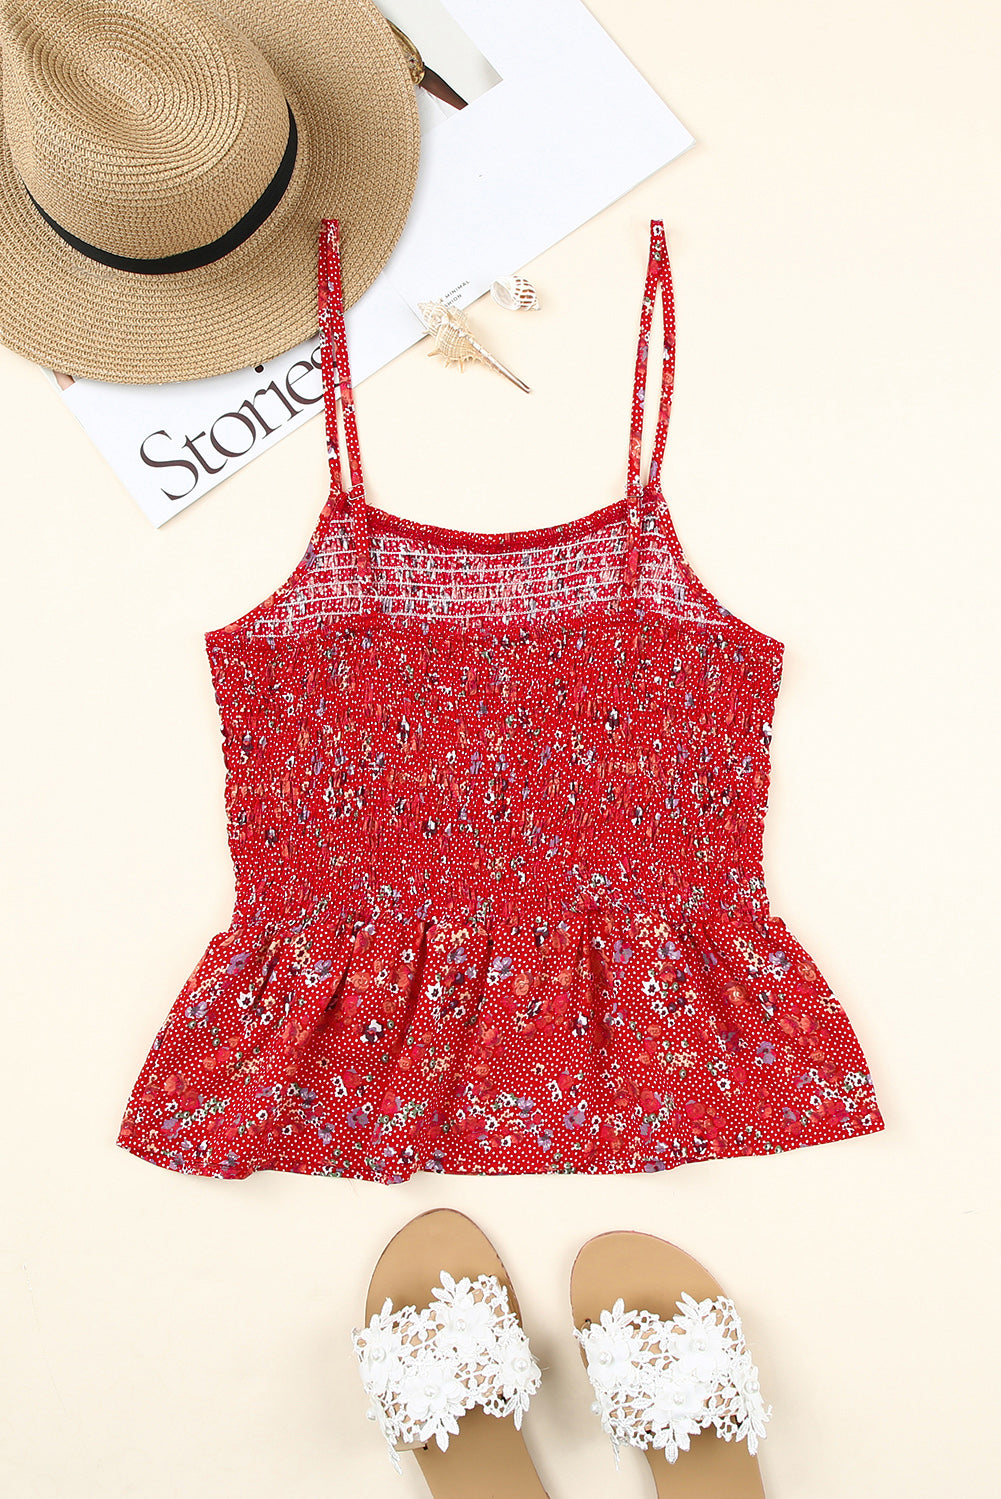 Fiery Red Floral Print Smocked Flounce Spaghetti Strap Camisole